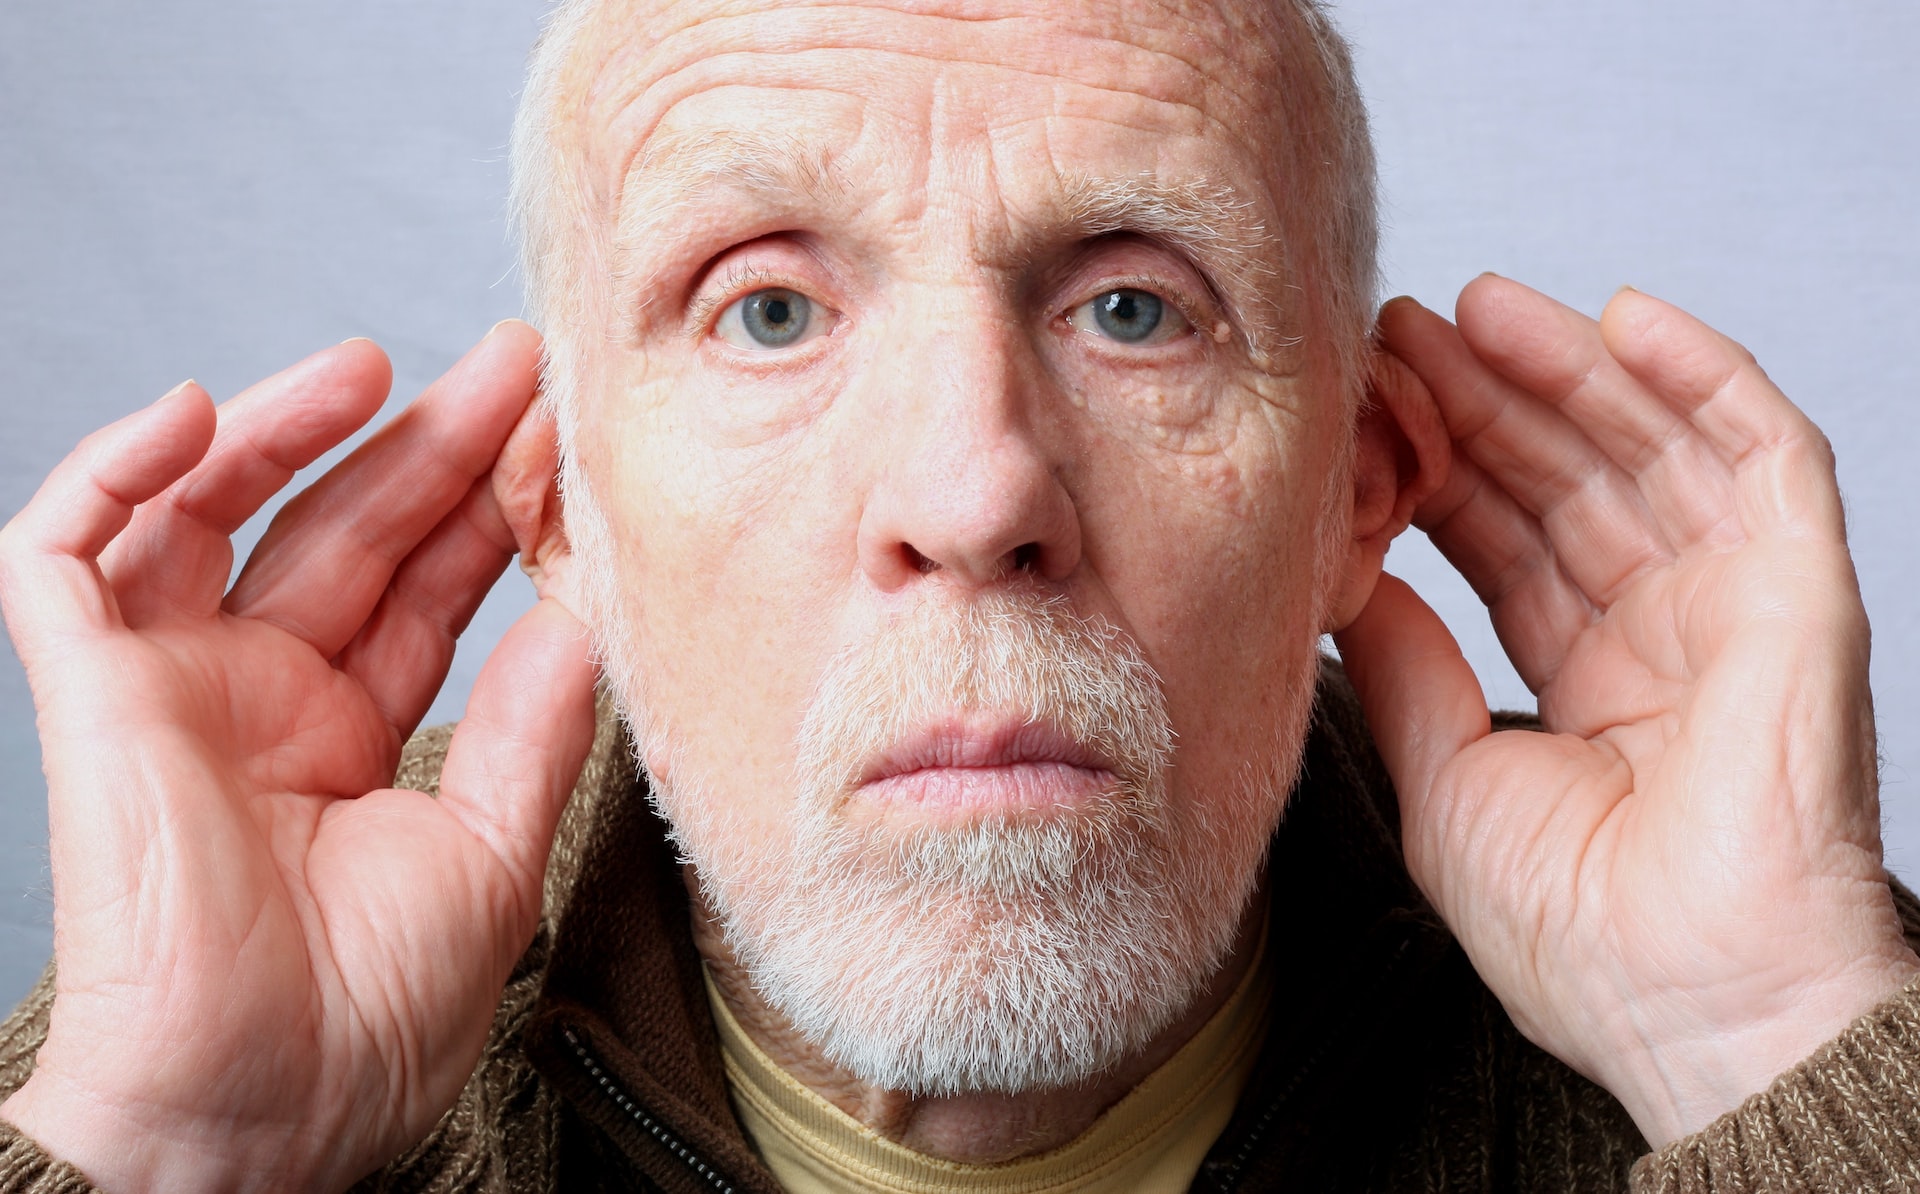 The Unsettling Conditions Hearing Loss Might Lead to